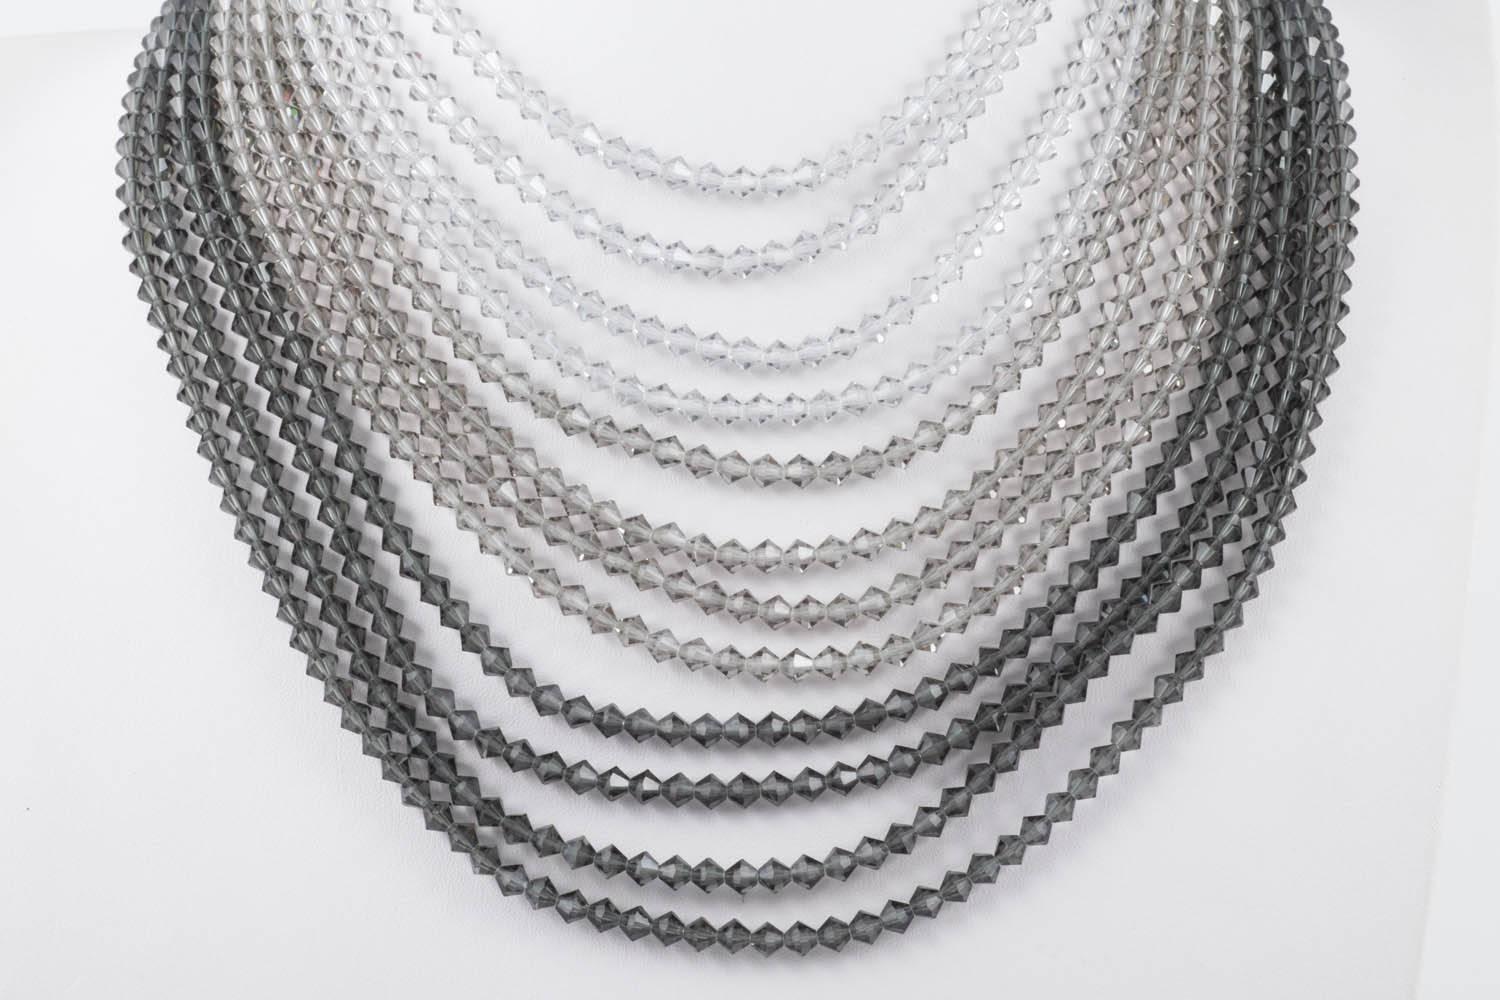 A beautiful multi-strand crystal necklace, made in Austria in the 1960s, twelve rows in graduated hues of grey, from soft light grey to smokey dark grey with a handset paste terminal at either end. A piece from Austria's heyday of producing fine and